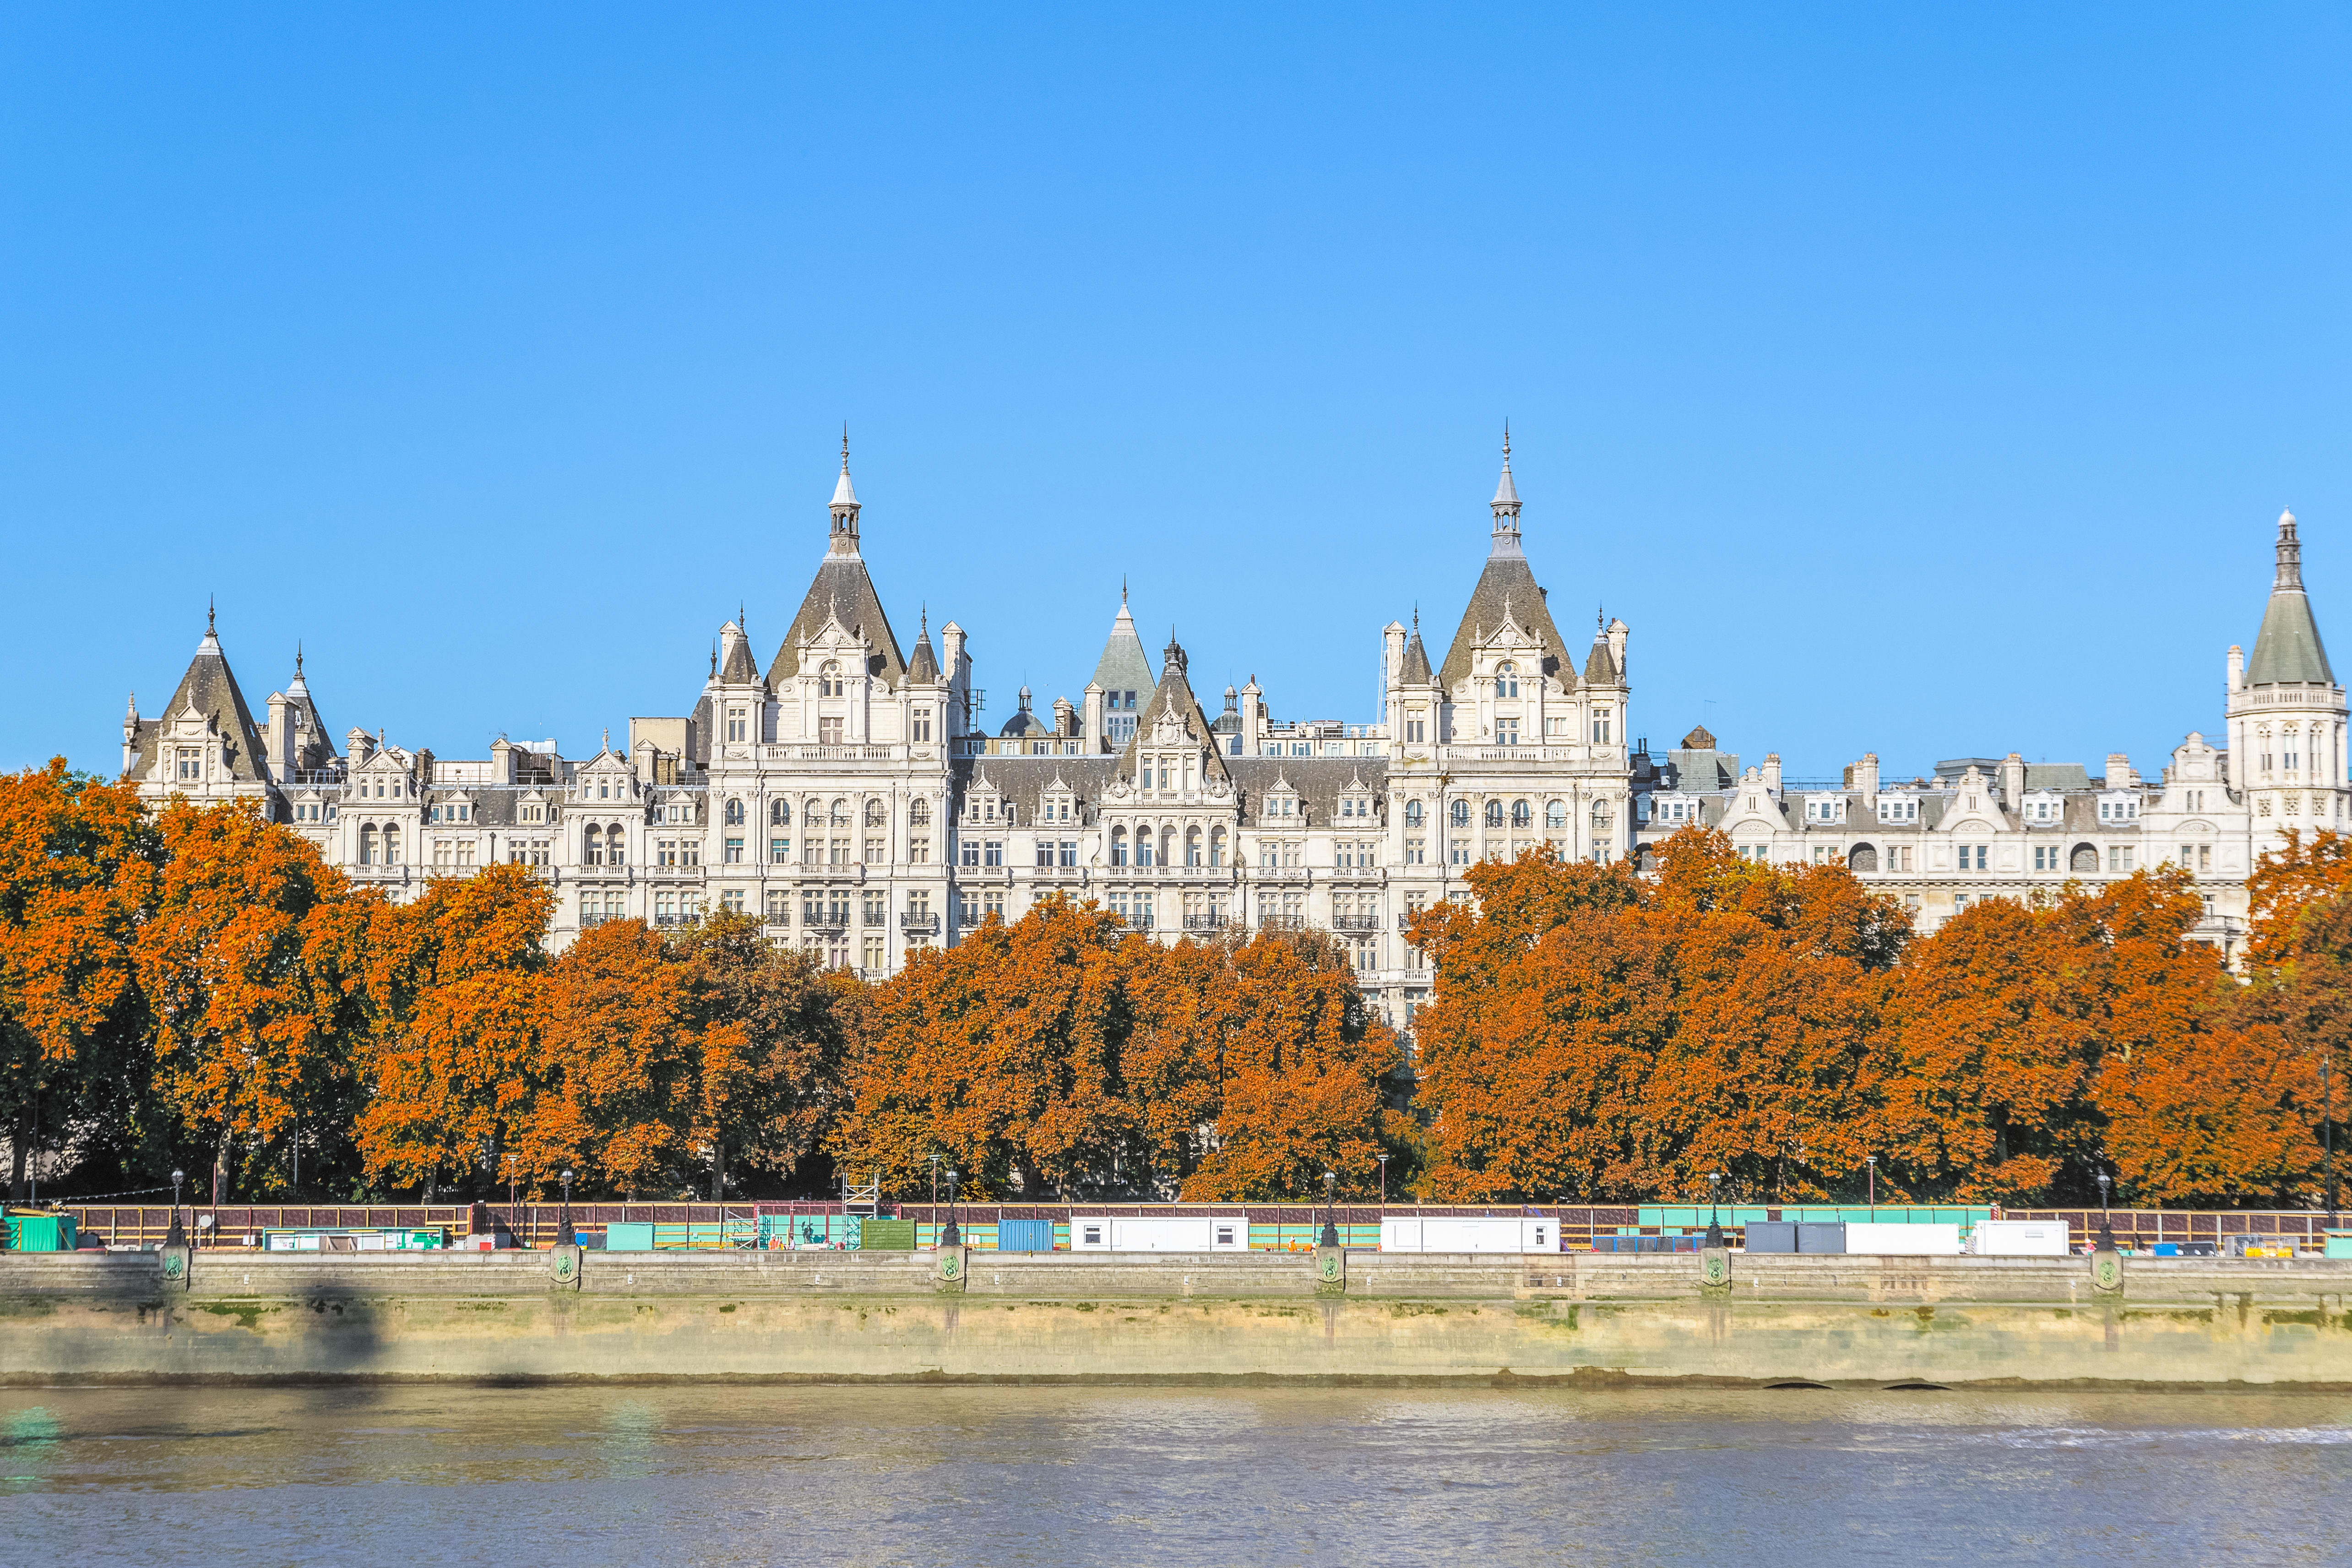 Most Luxurious Hotels in London